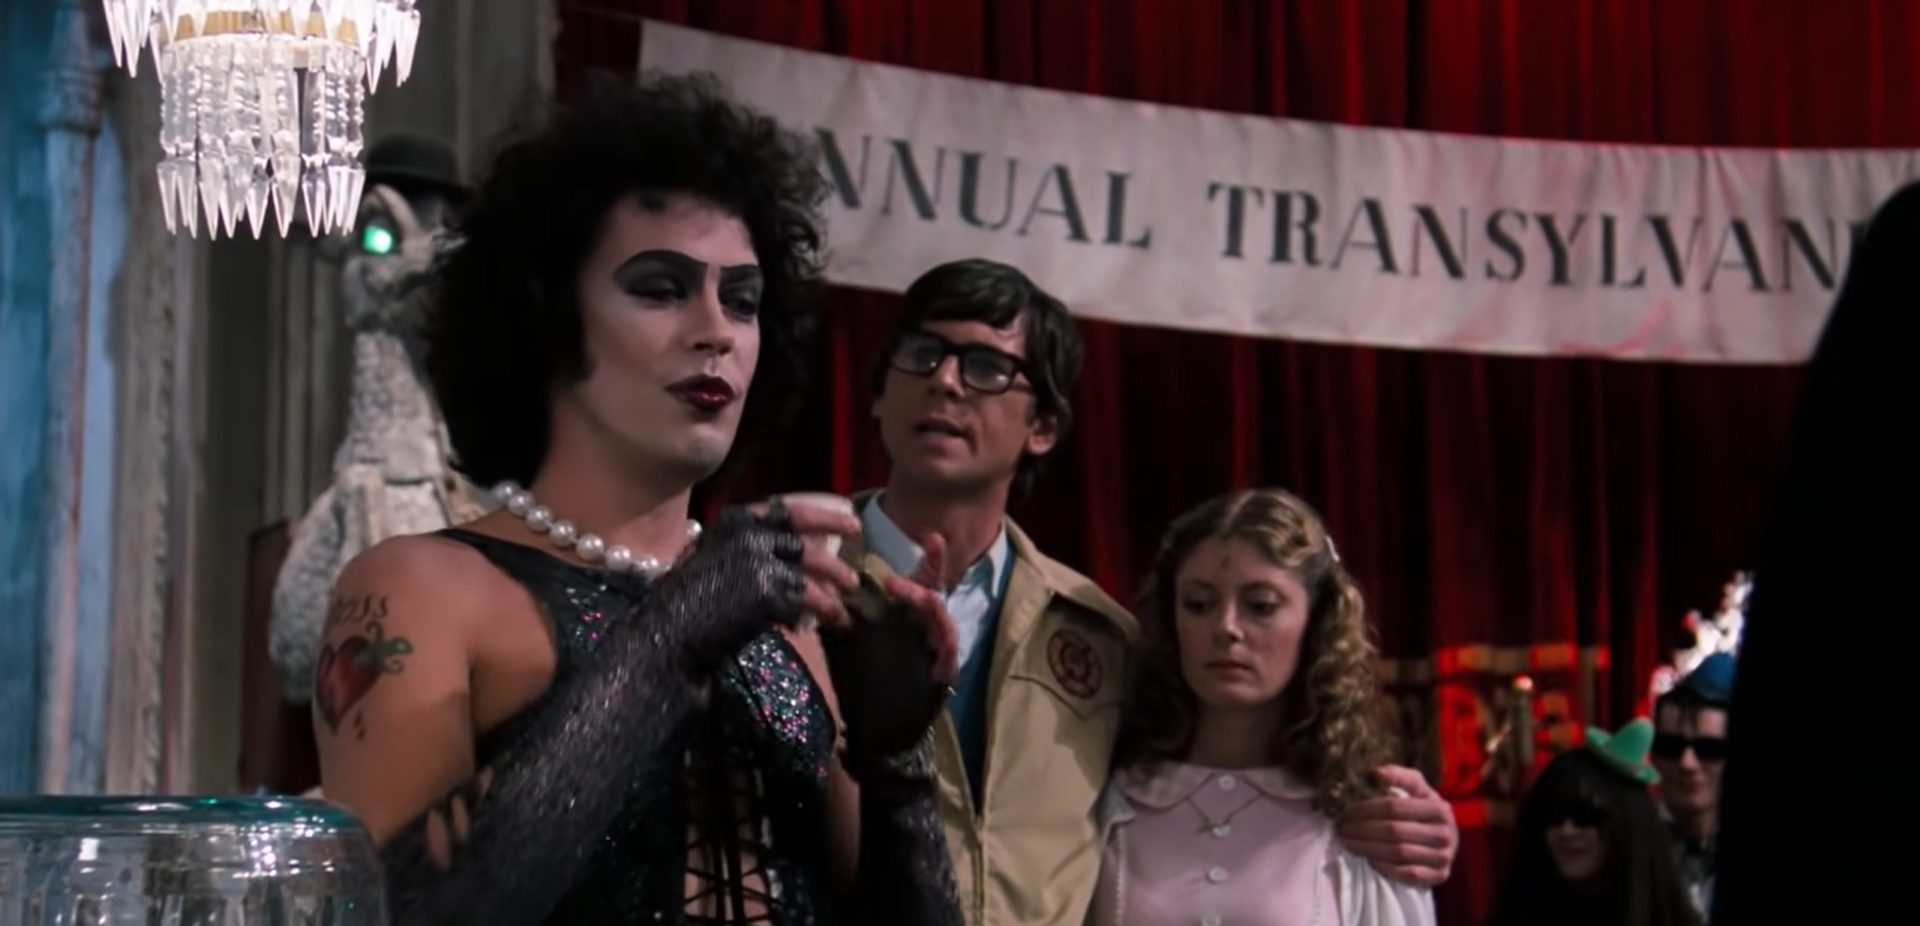 Featured image The rocky horror picture show